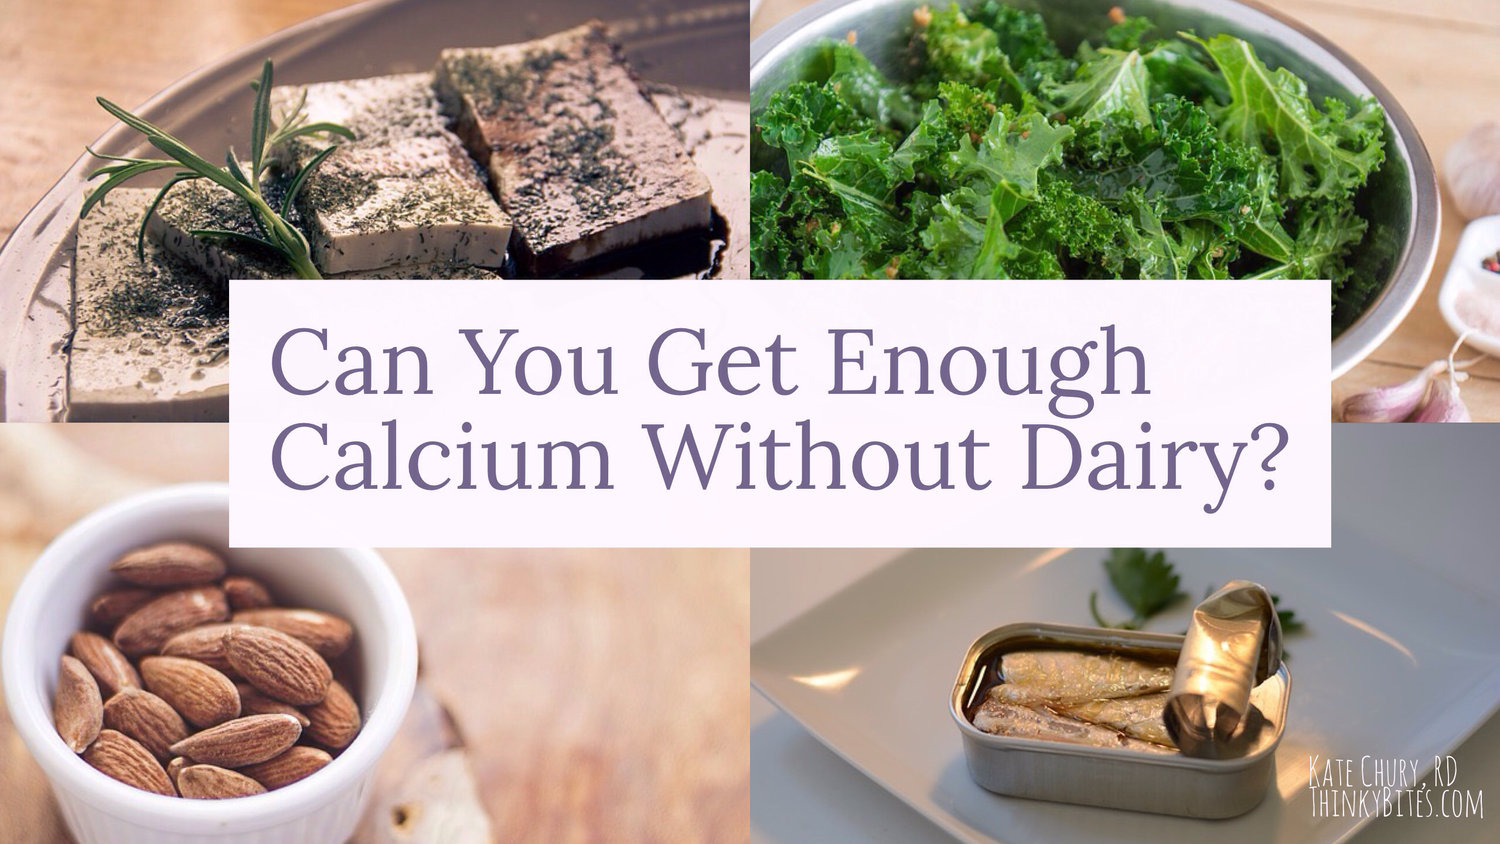 Can You Get Enough Calcium Without Dairy?